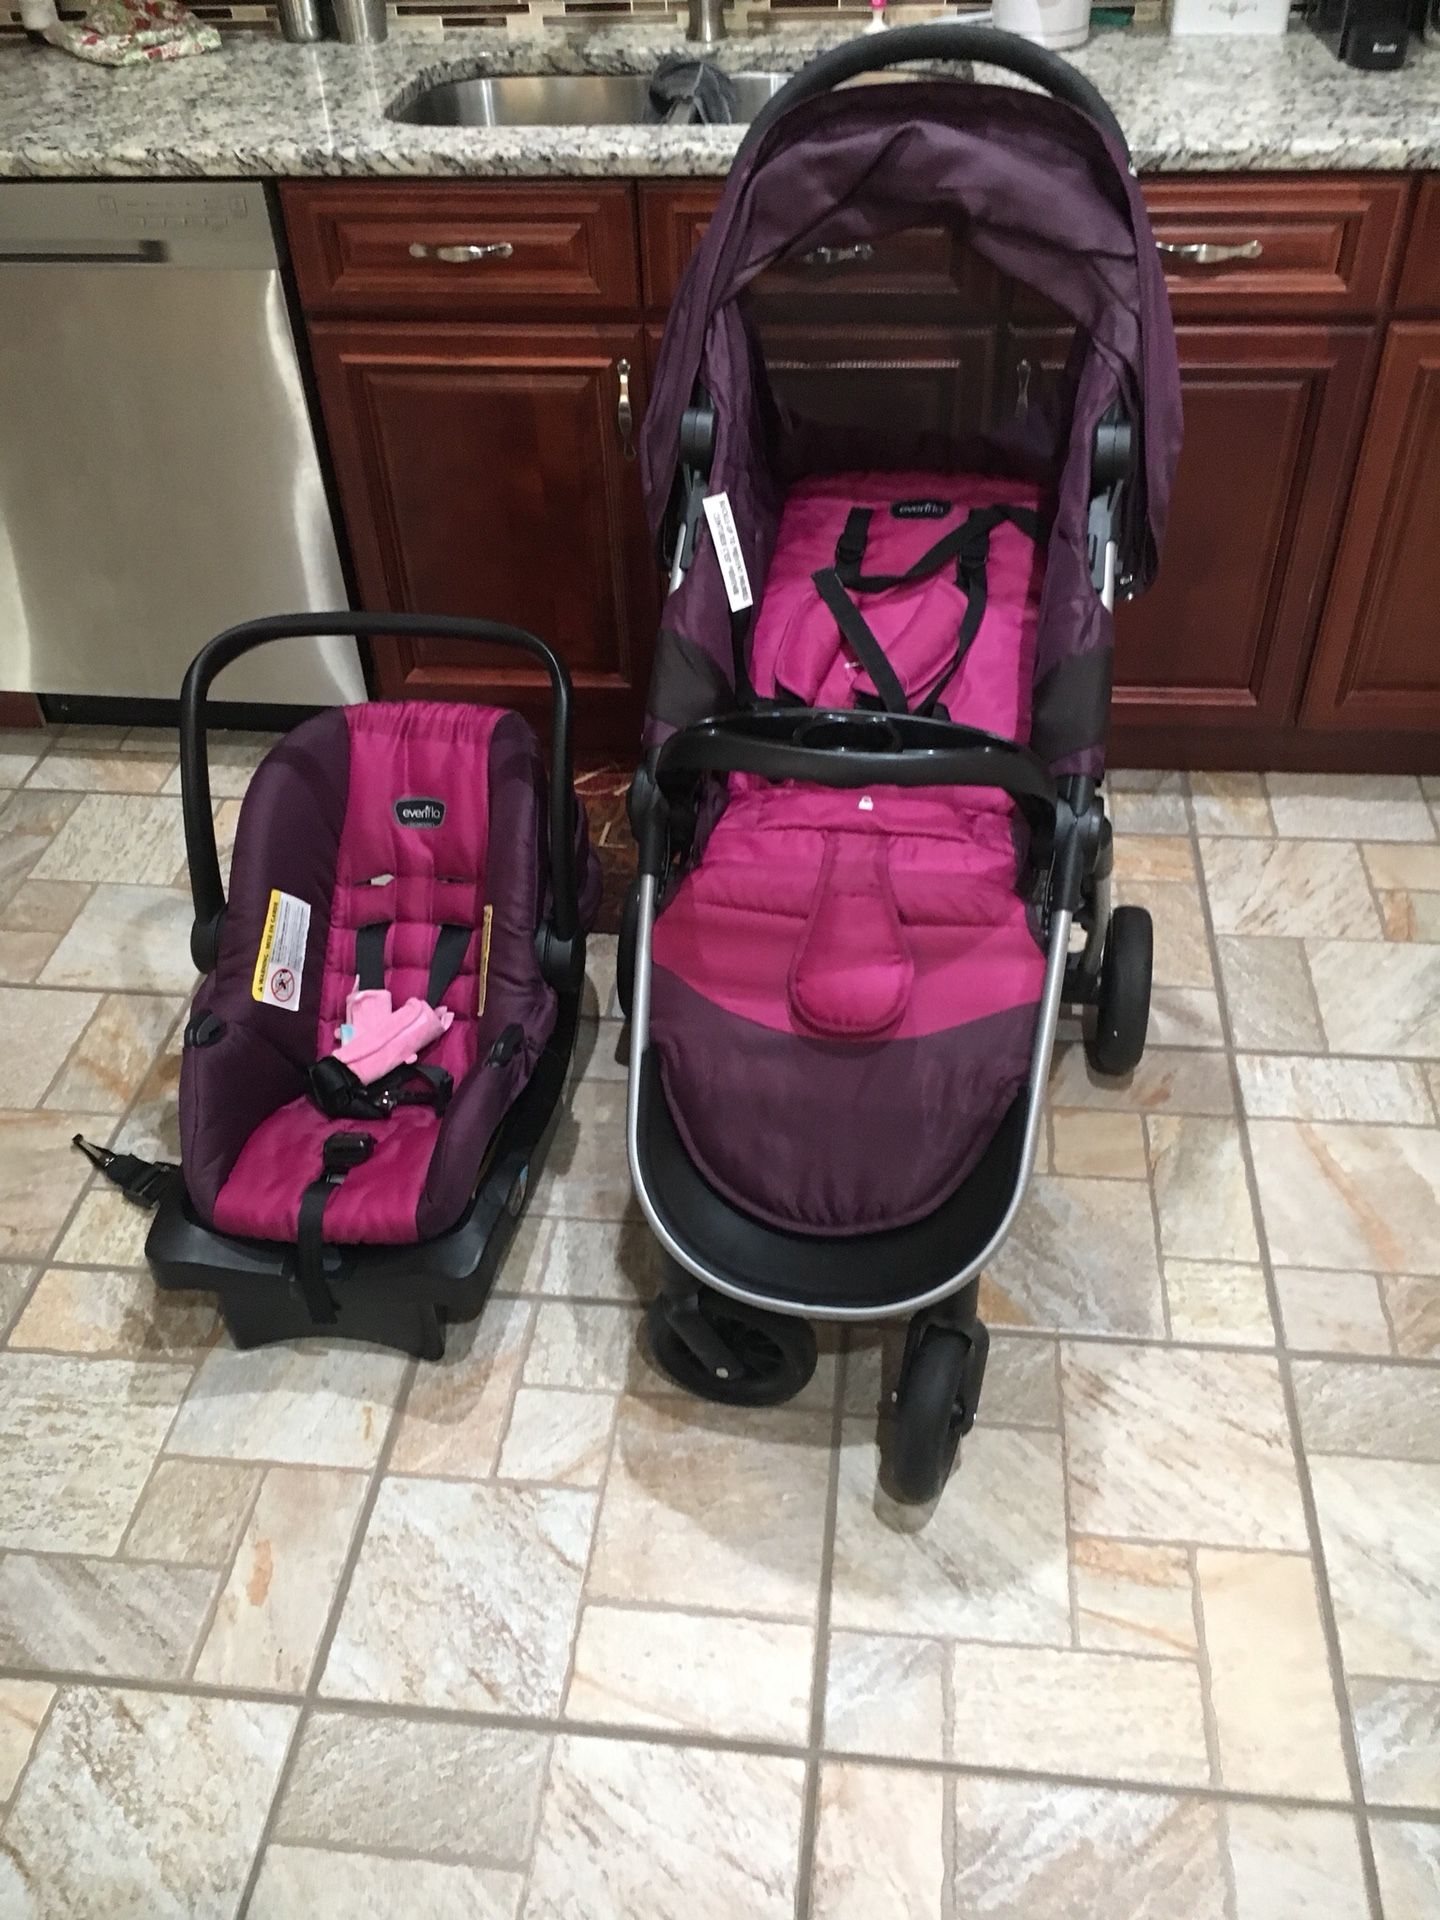 Stroller end seat car, good condition used only three months.